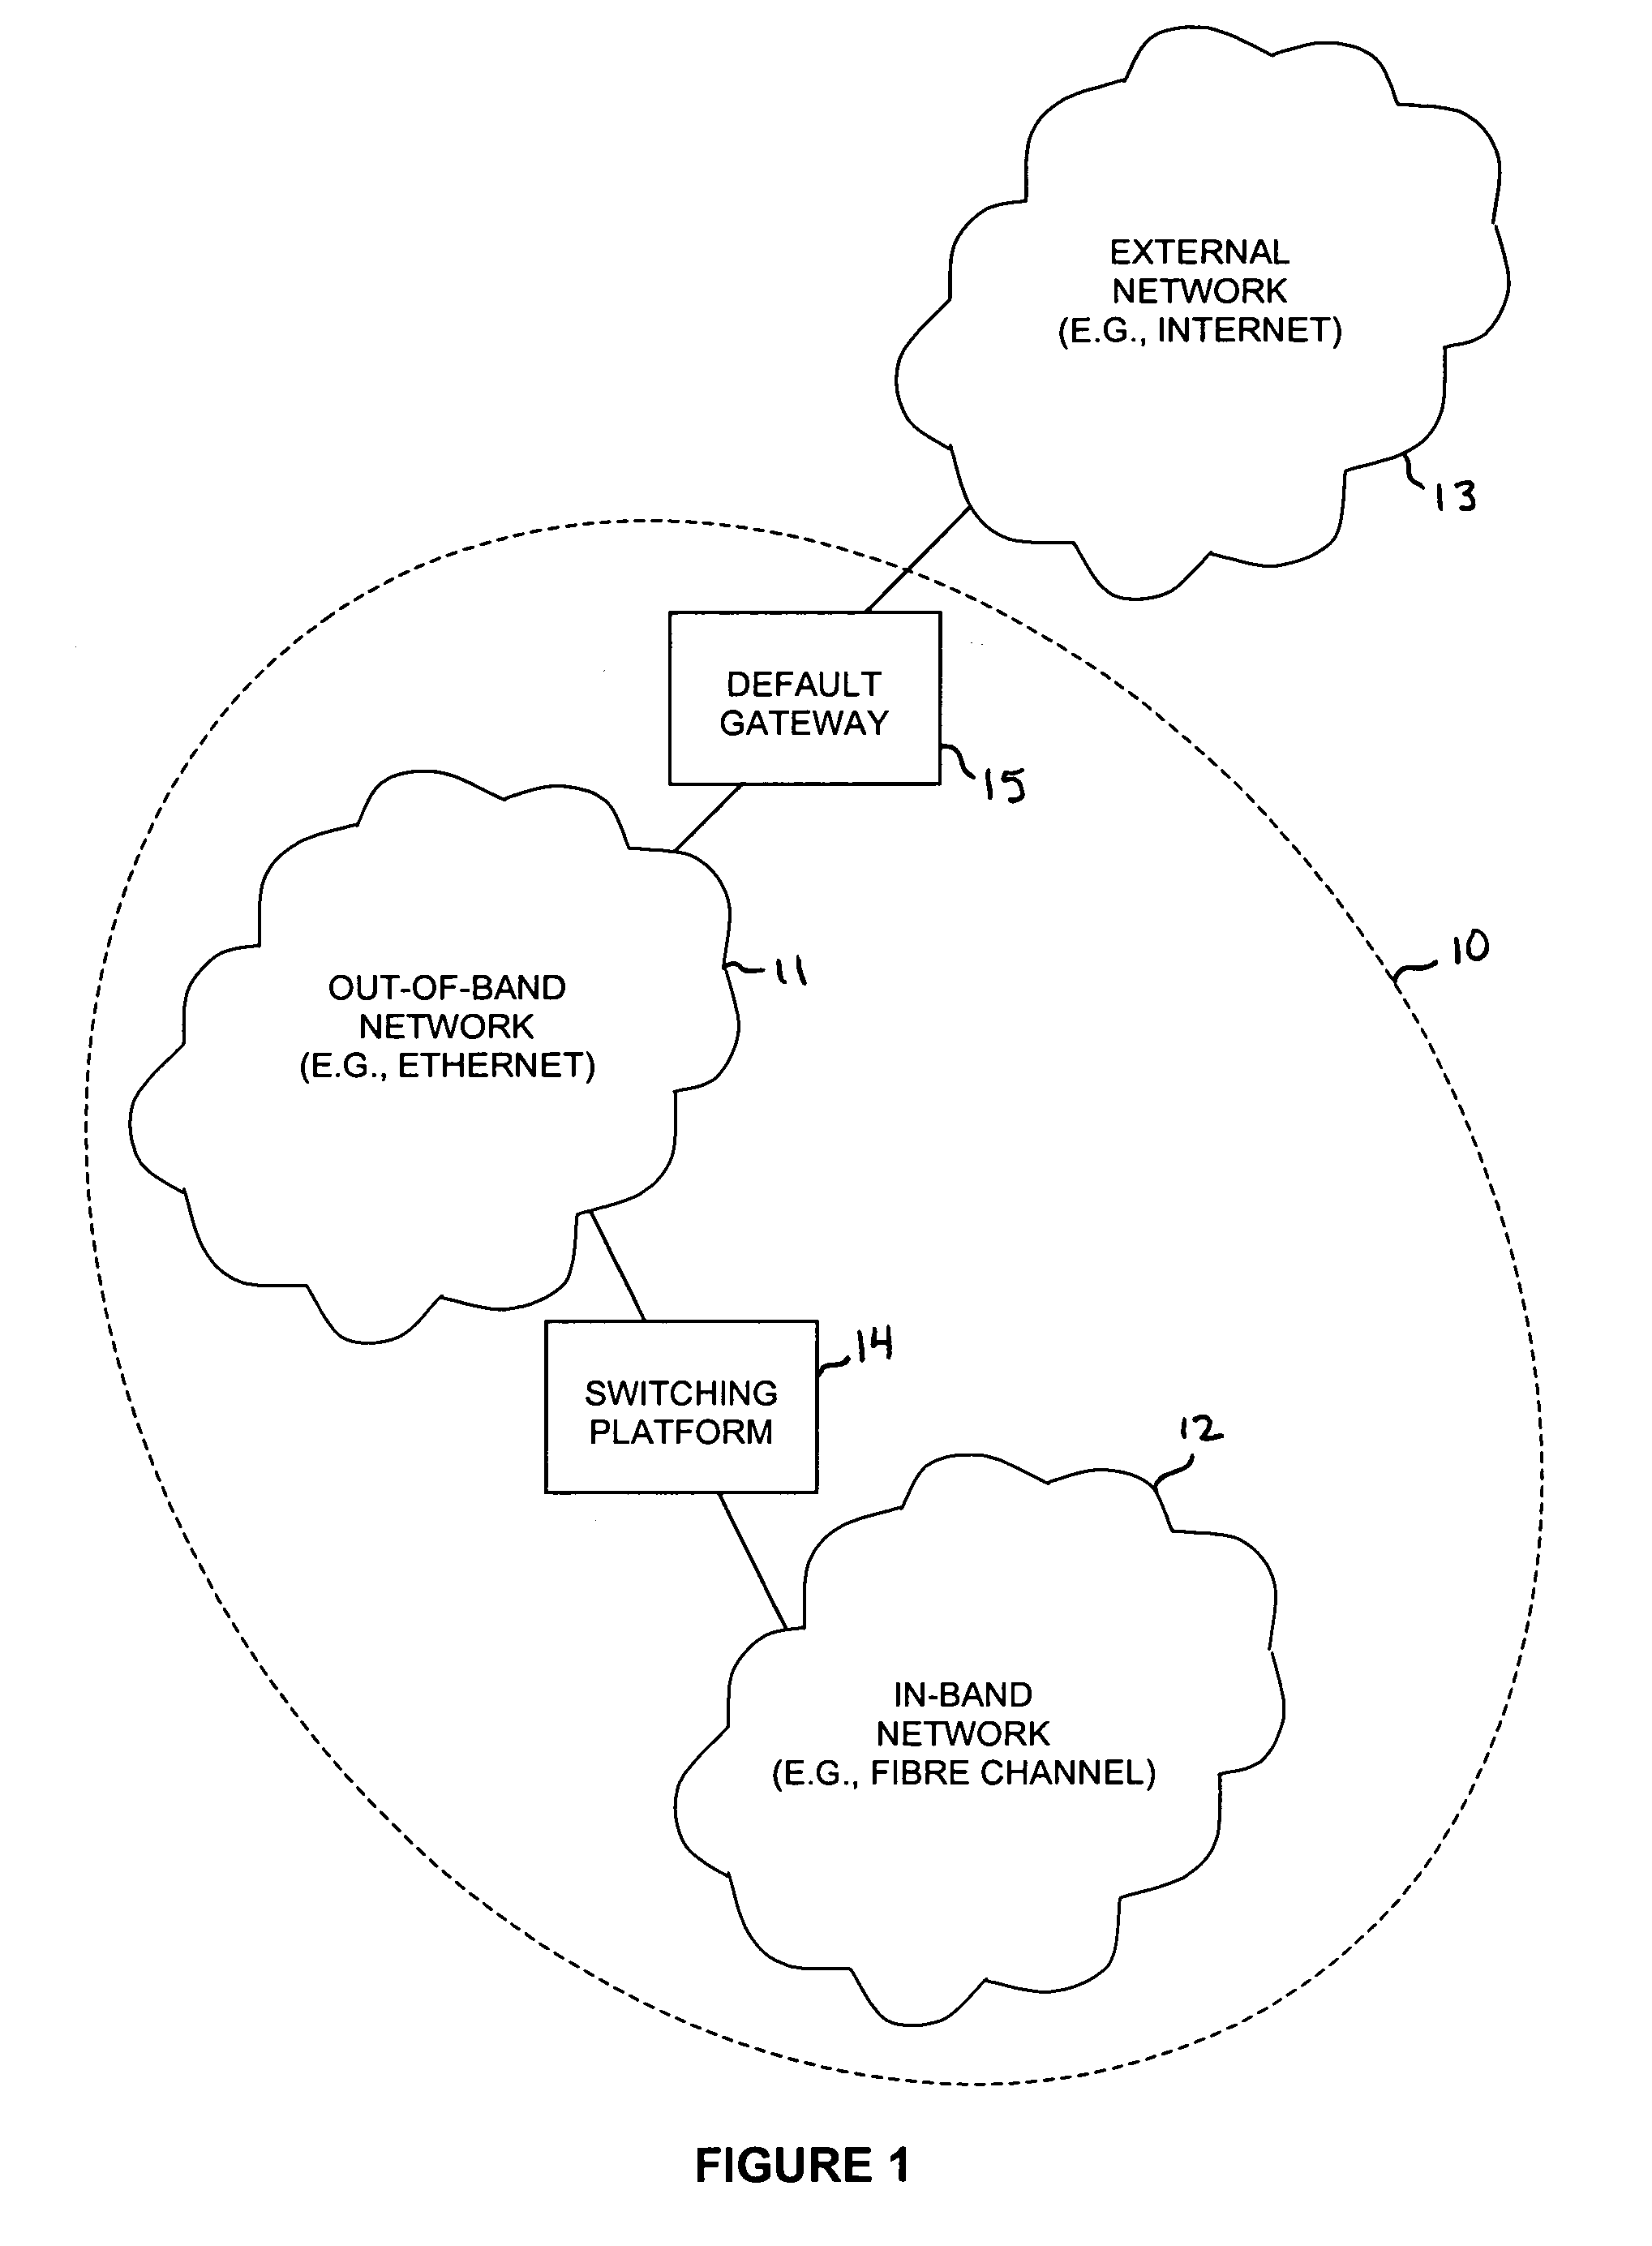 Method of routing HTTP and FTP services across heterogeneous networks